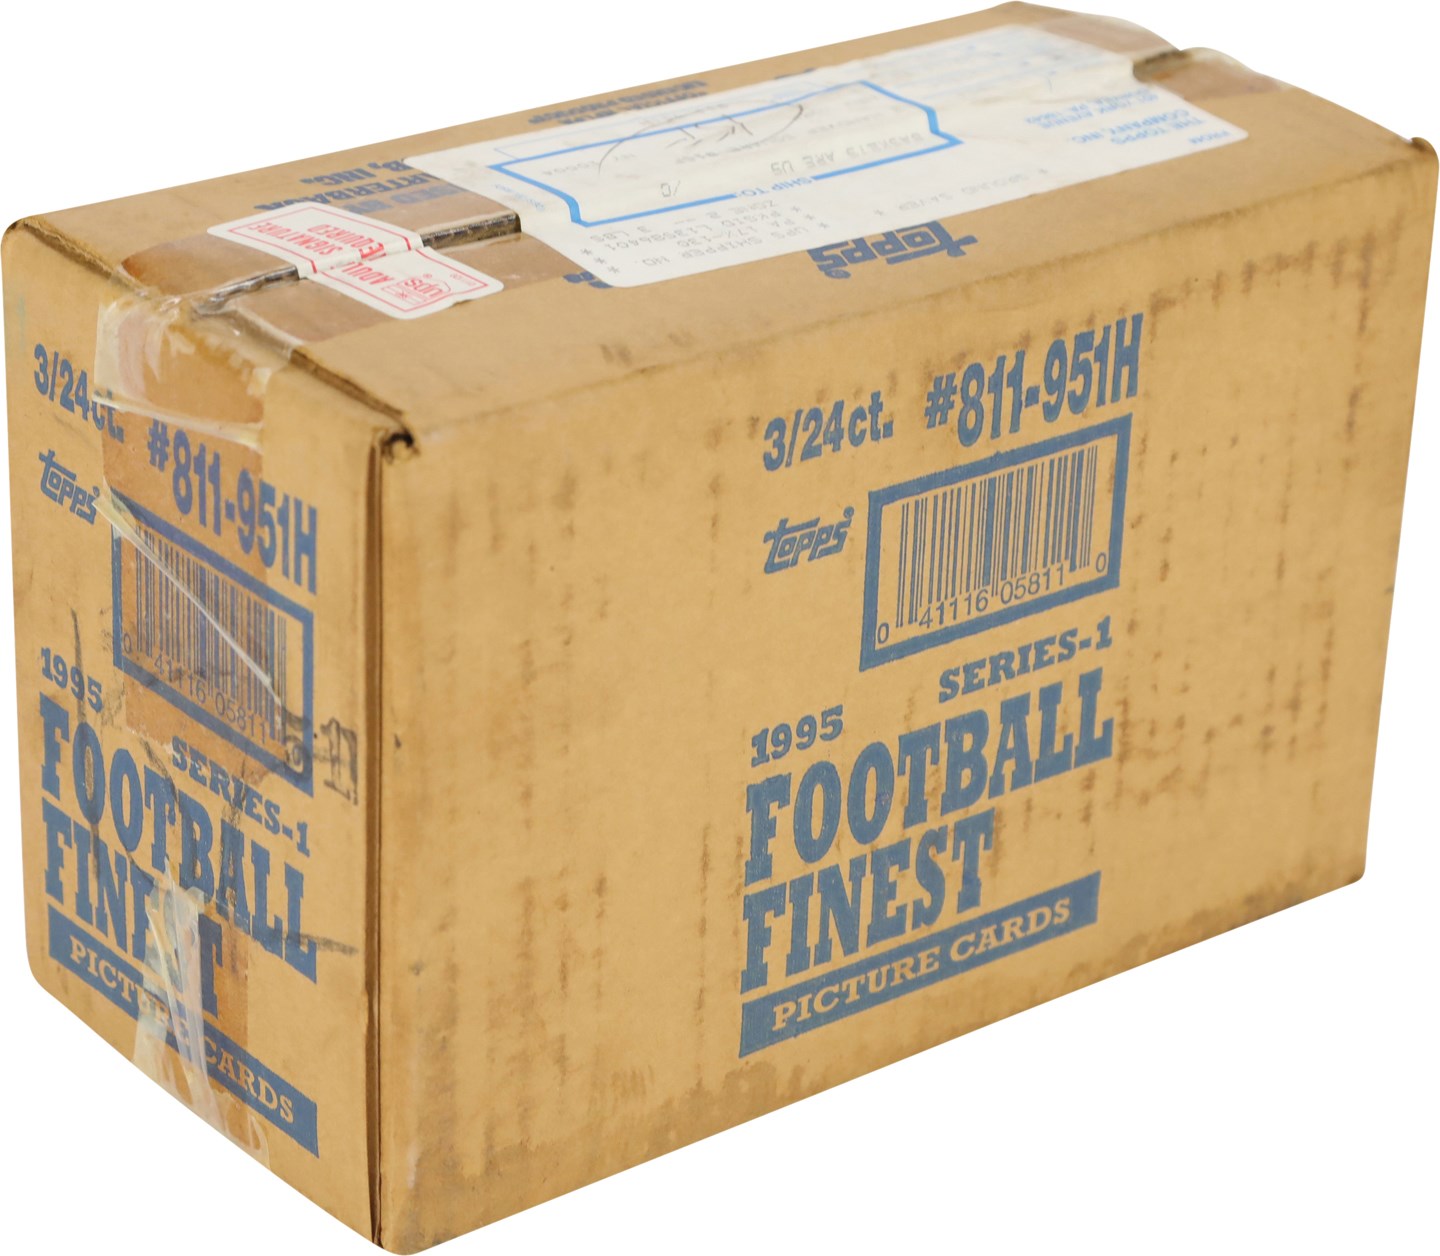 Unopened Boxes, Packs And Cases - 1995 Topps Finest Football Series 1 Factory Sealed 3 Box Case (1)